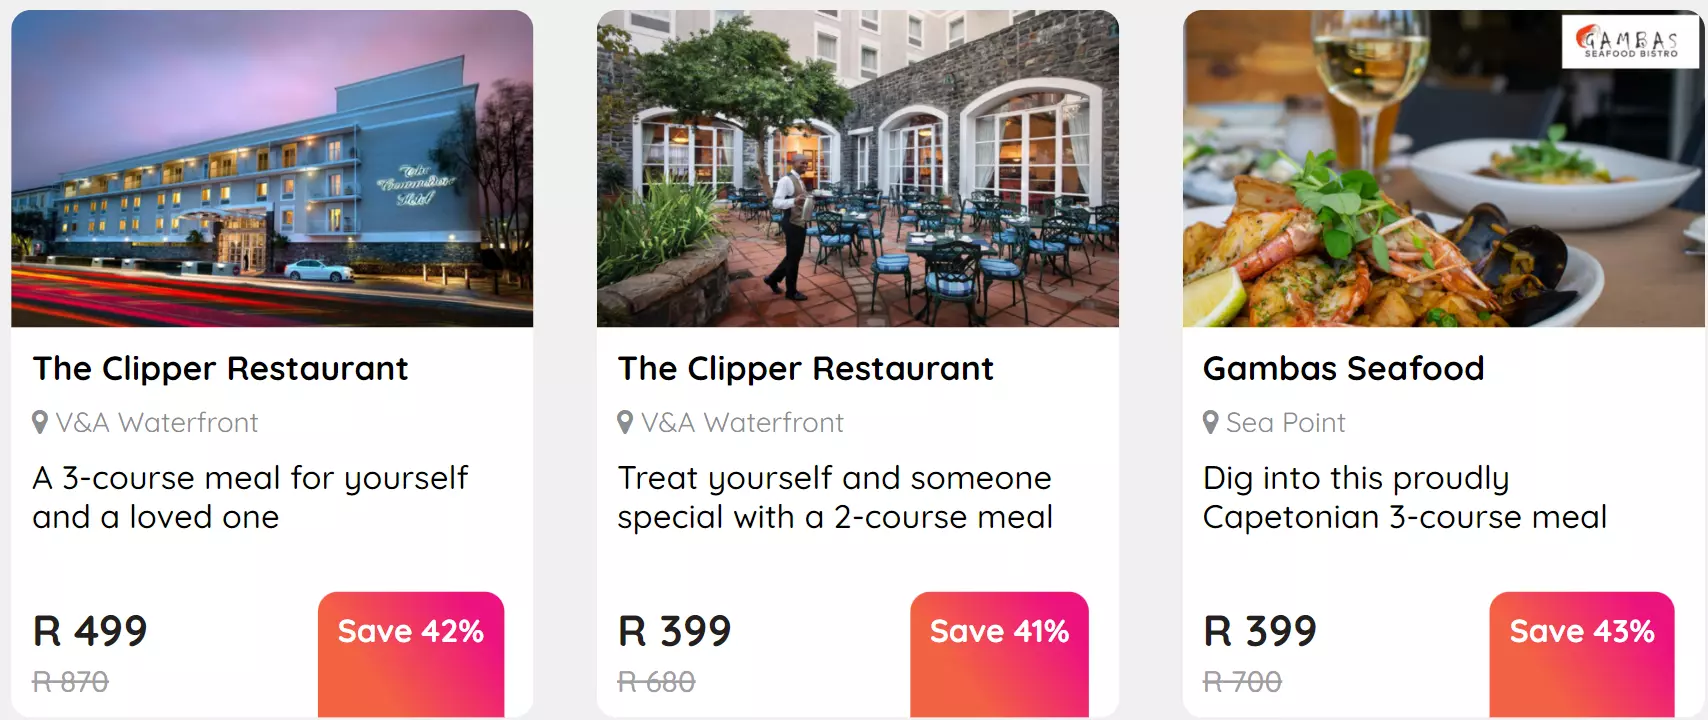 restaurant deals - things to do in cape town